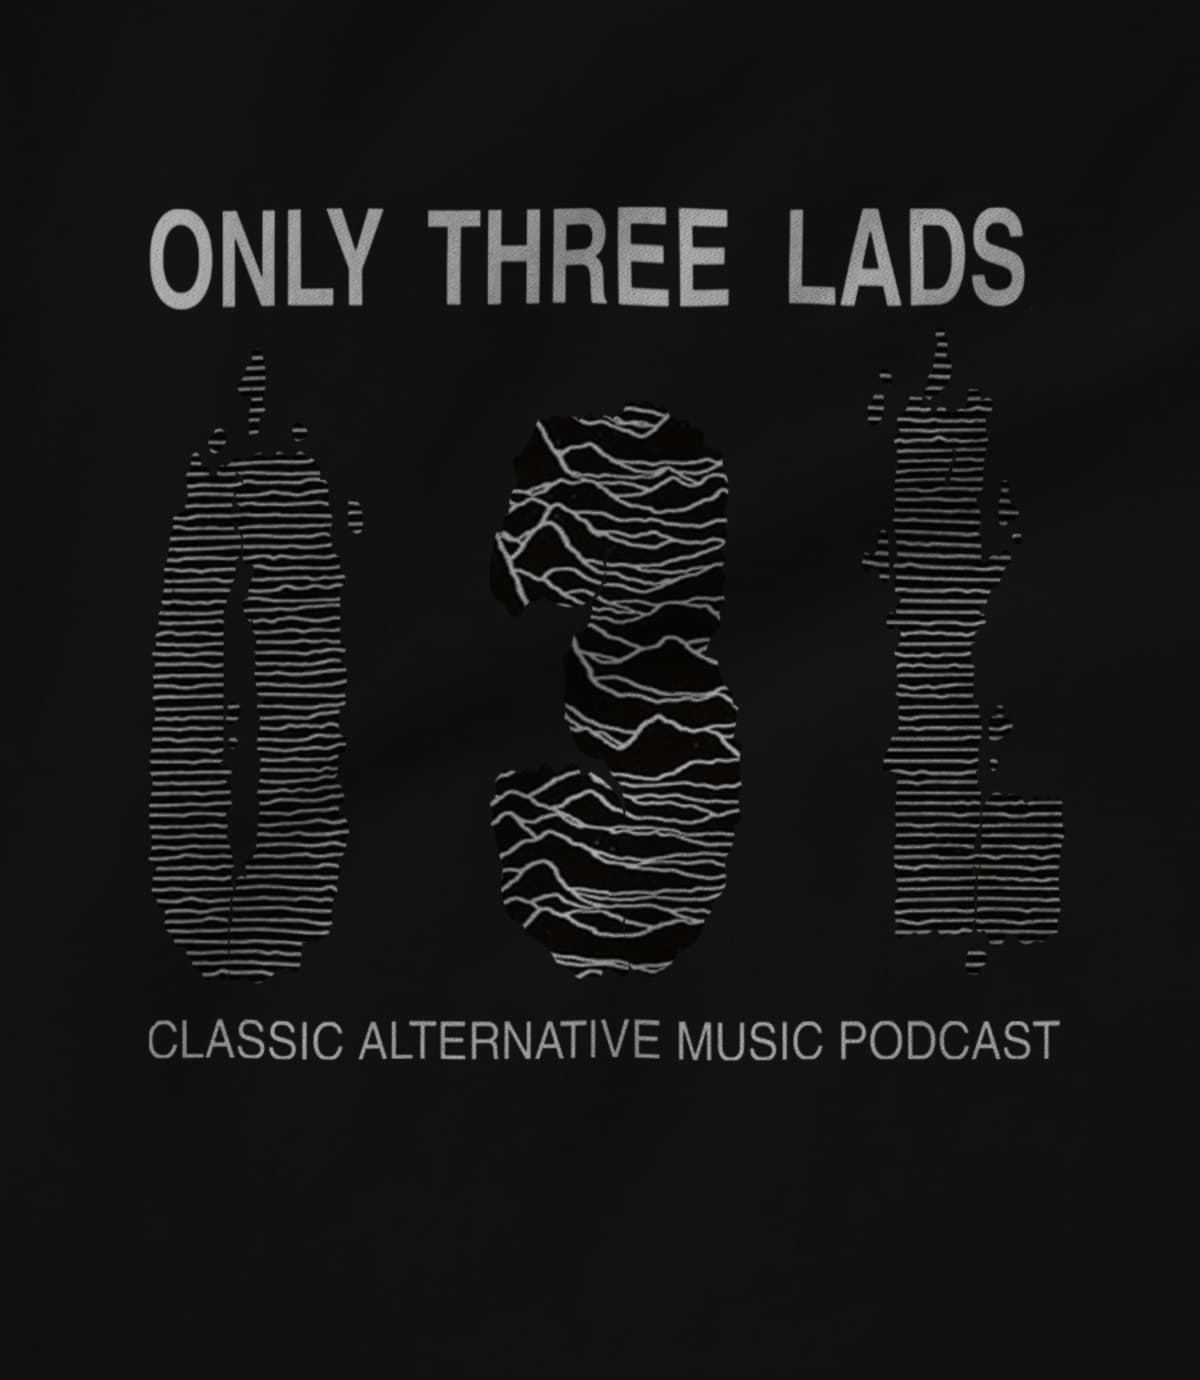 Only three lads somewhat known pleasures 1621387598